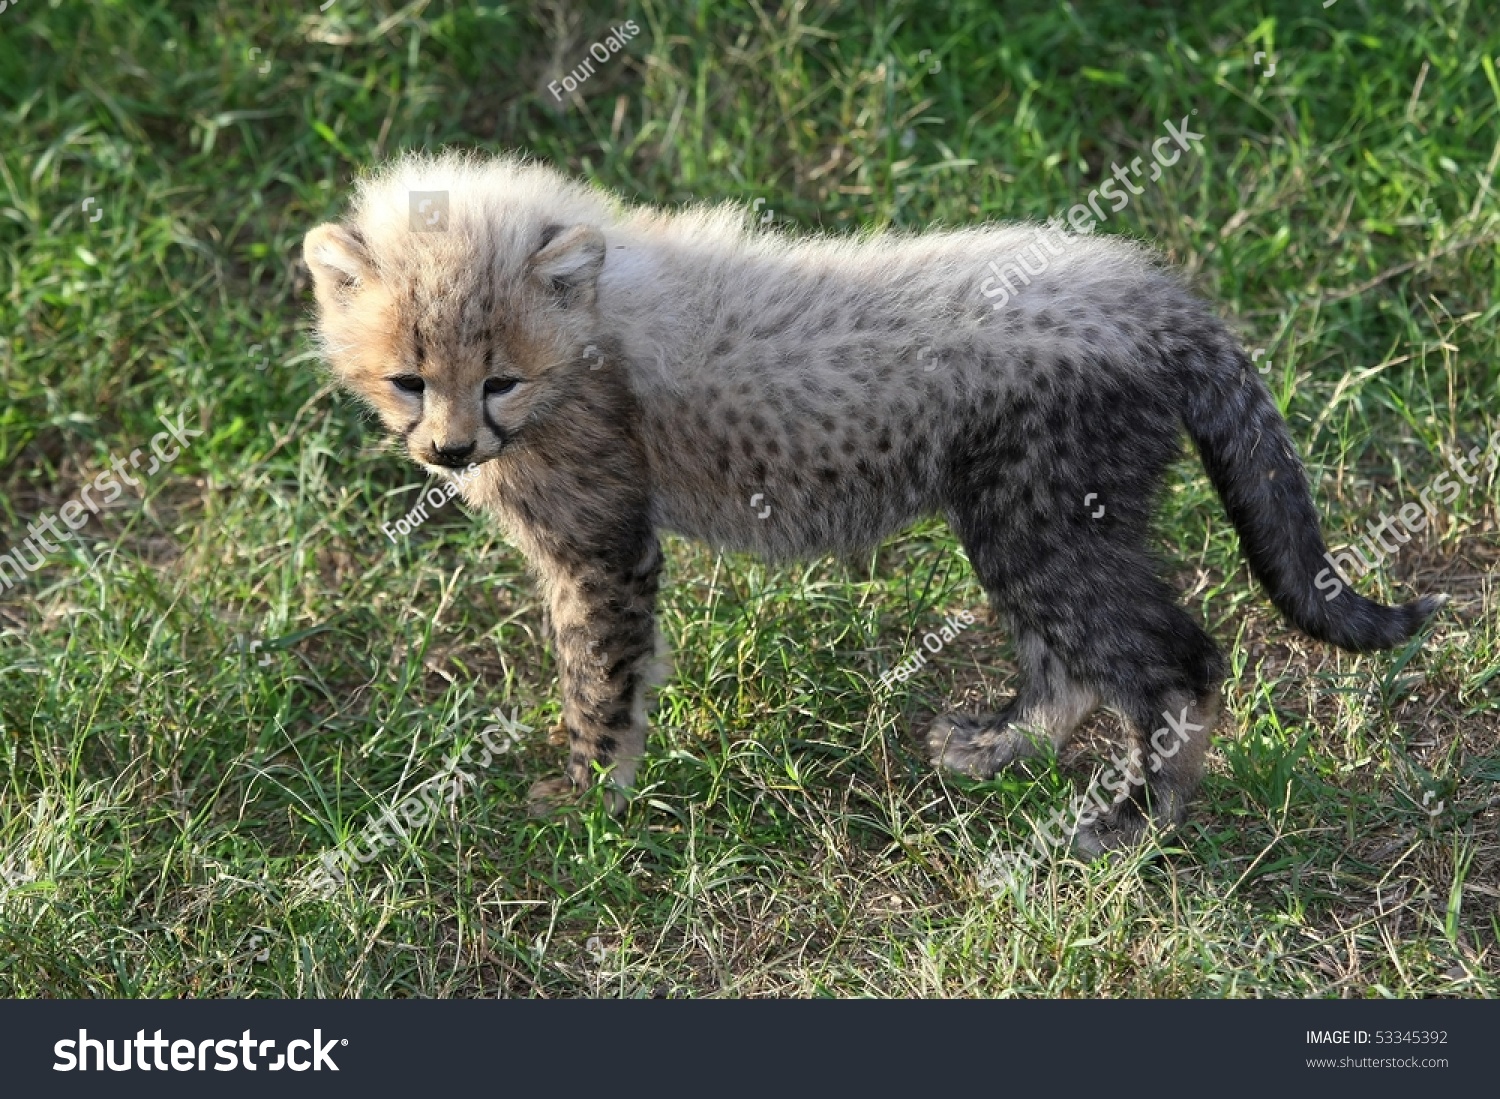 Small Baby Cheetah With Charateristic White Fur On Its Back Stock